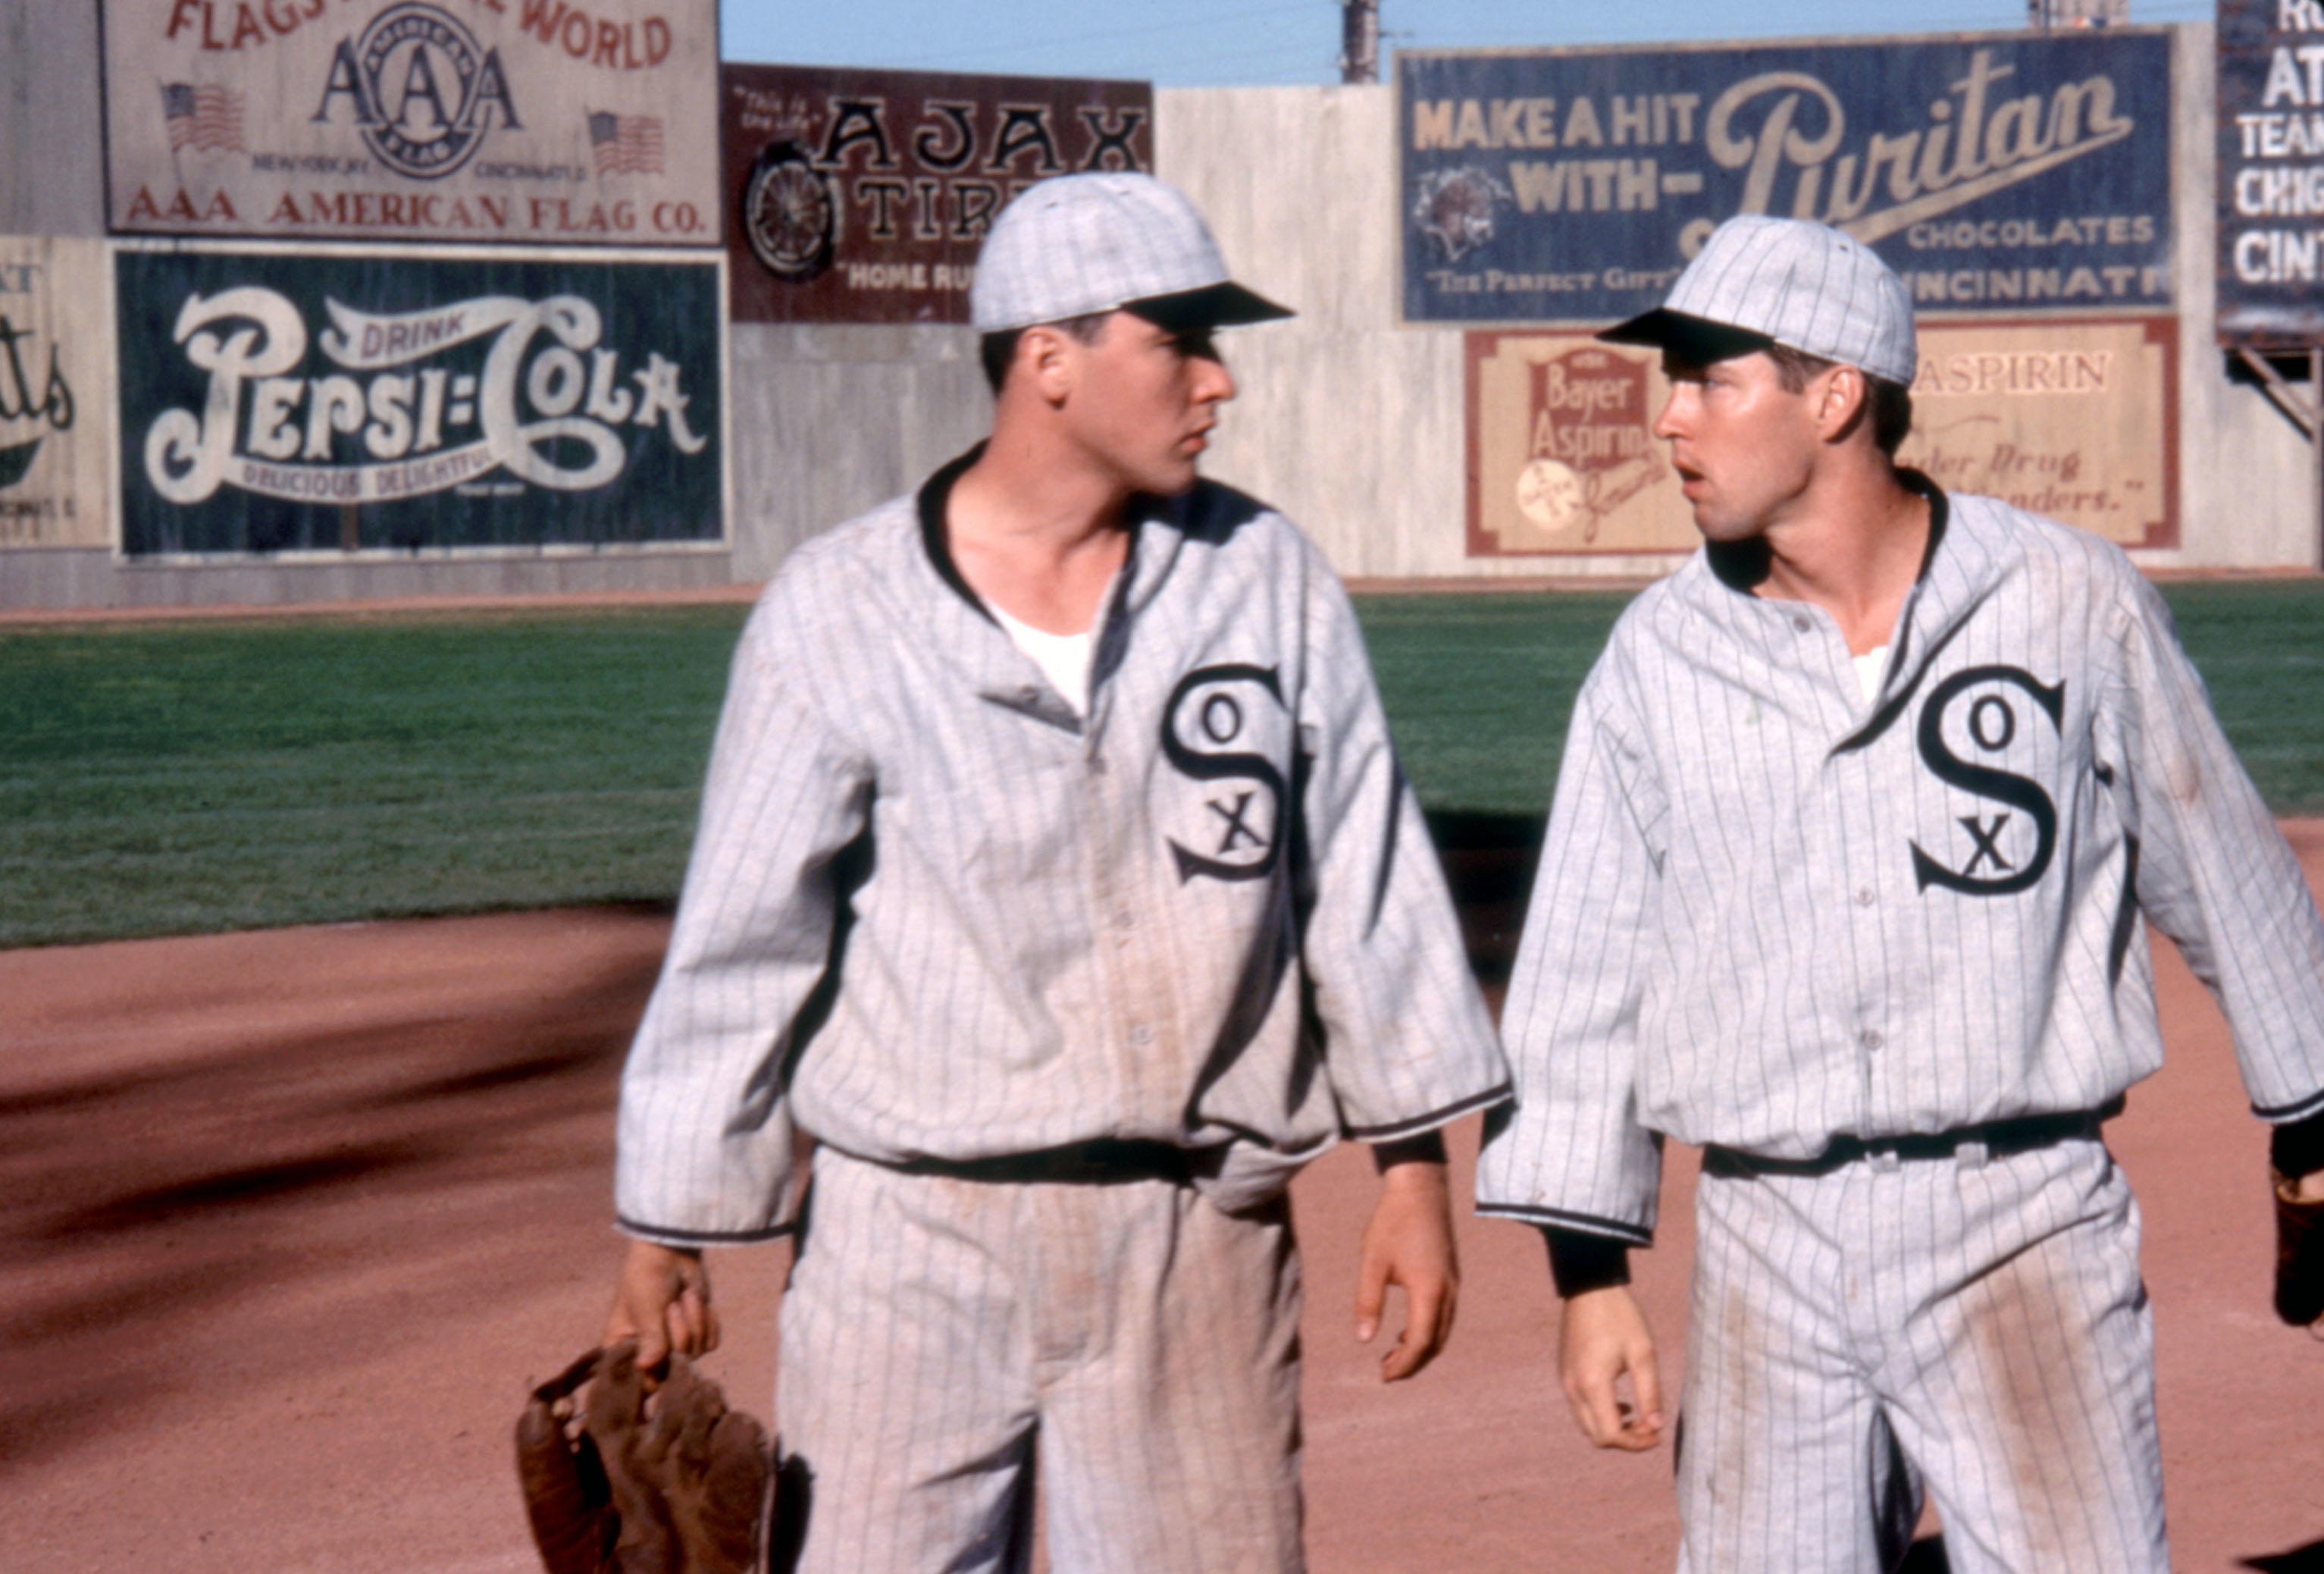 Two baseball players in vintage Chicago White Sox uniforms converse on the field